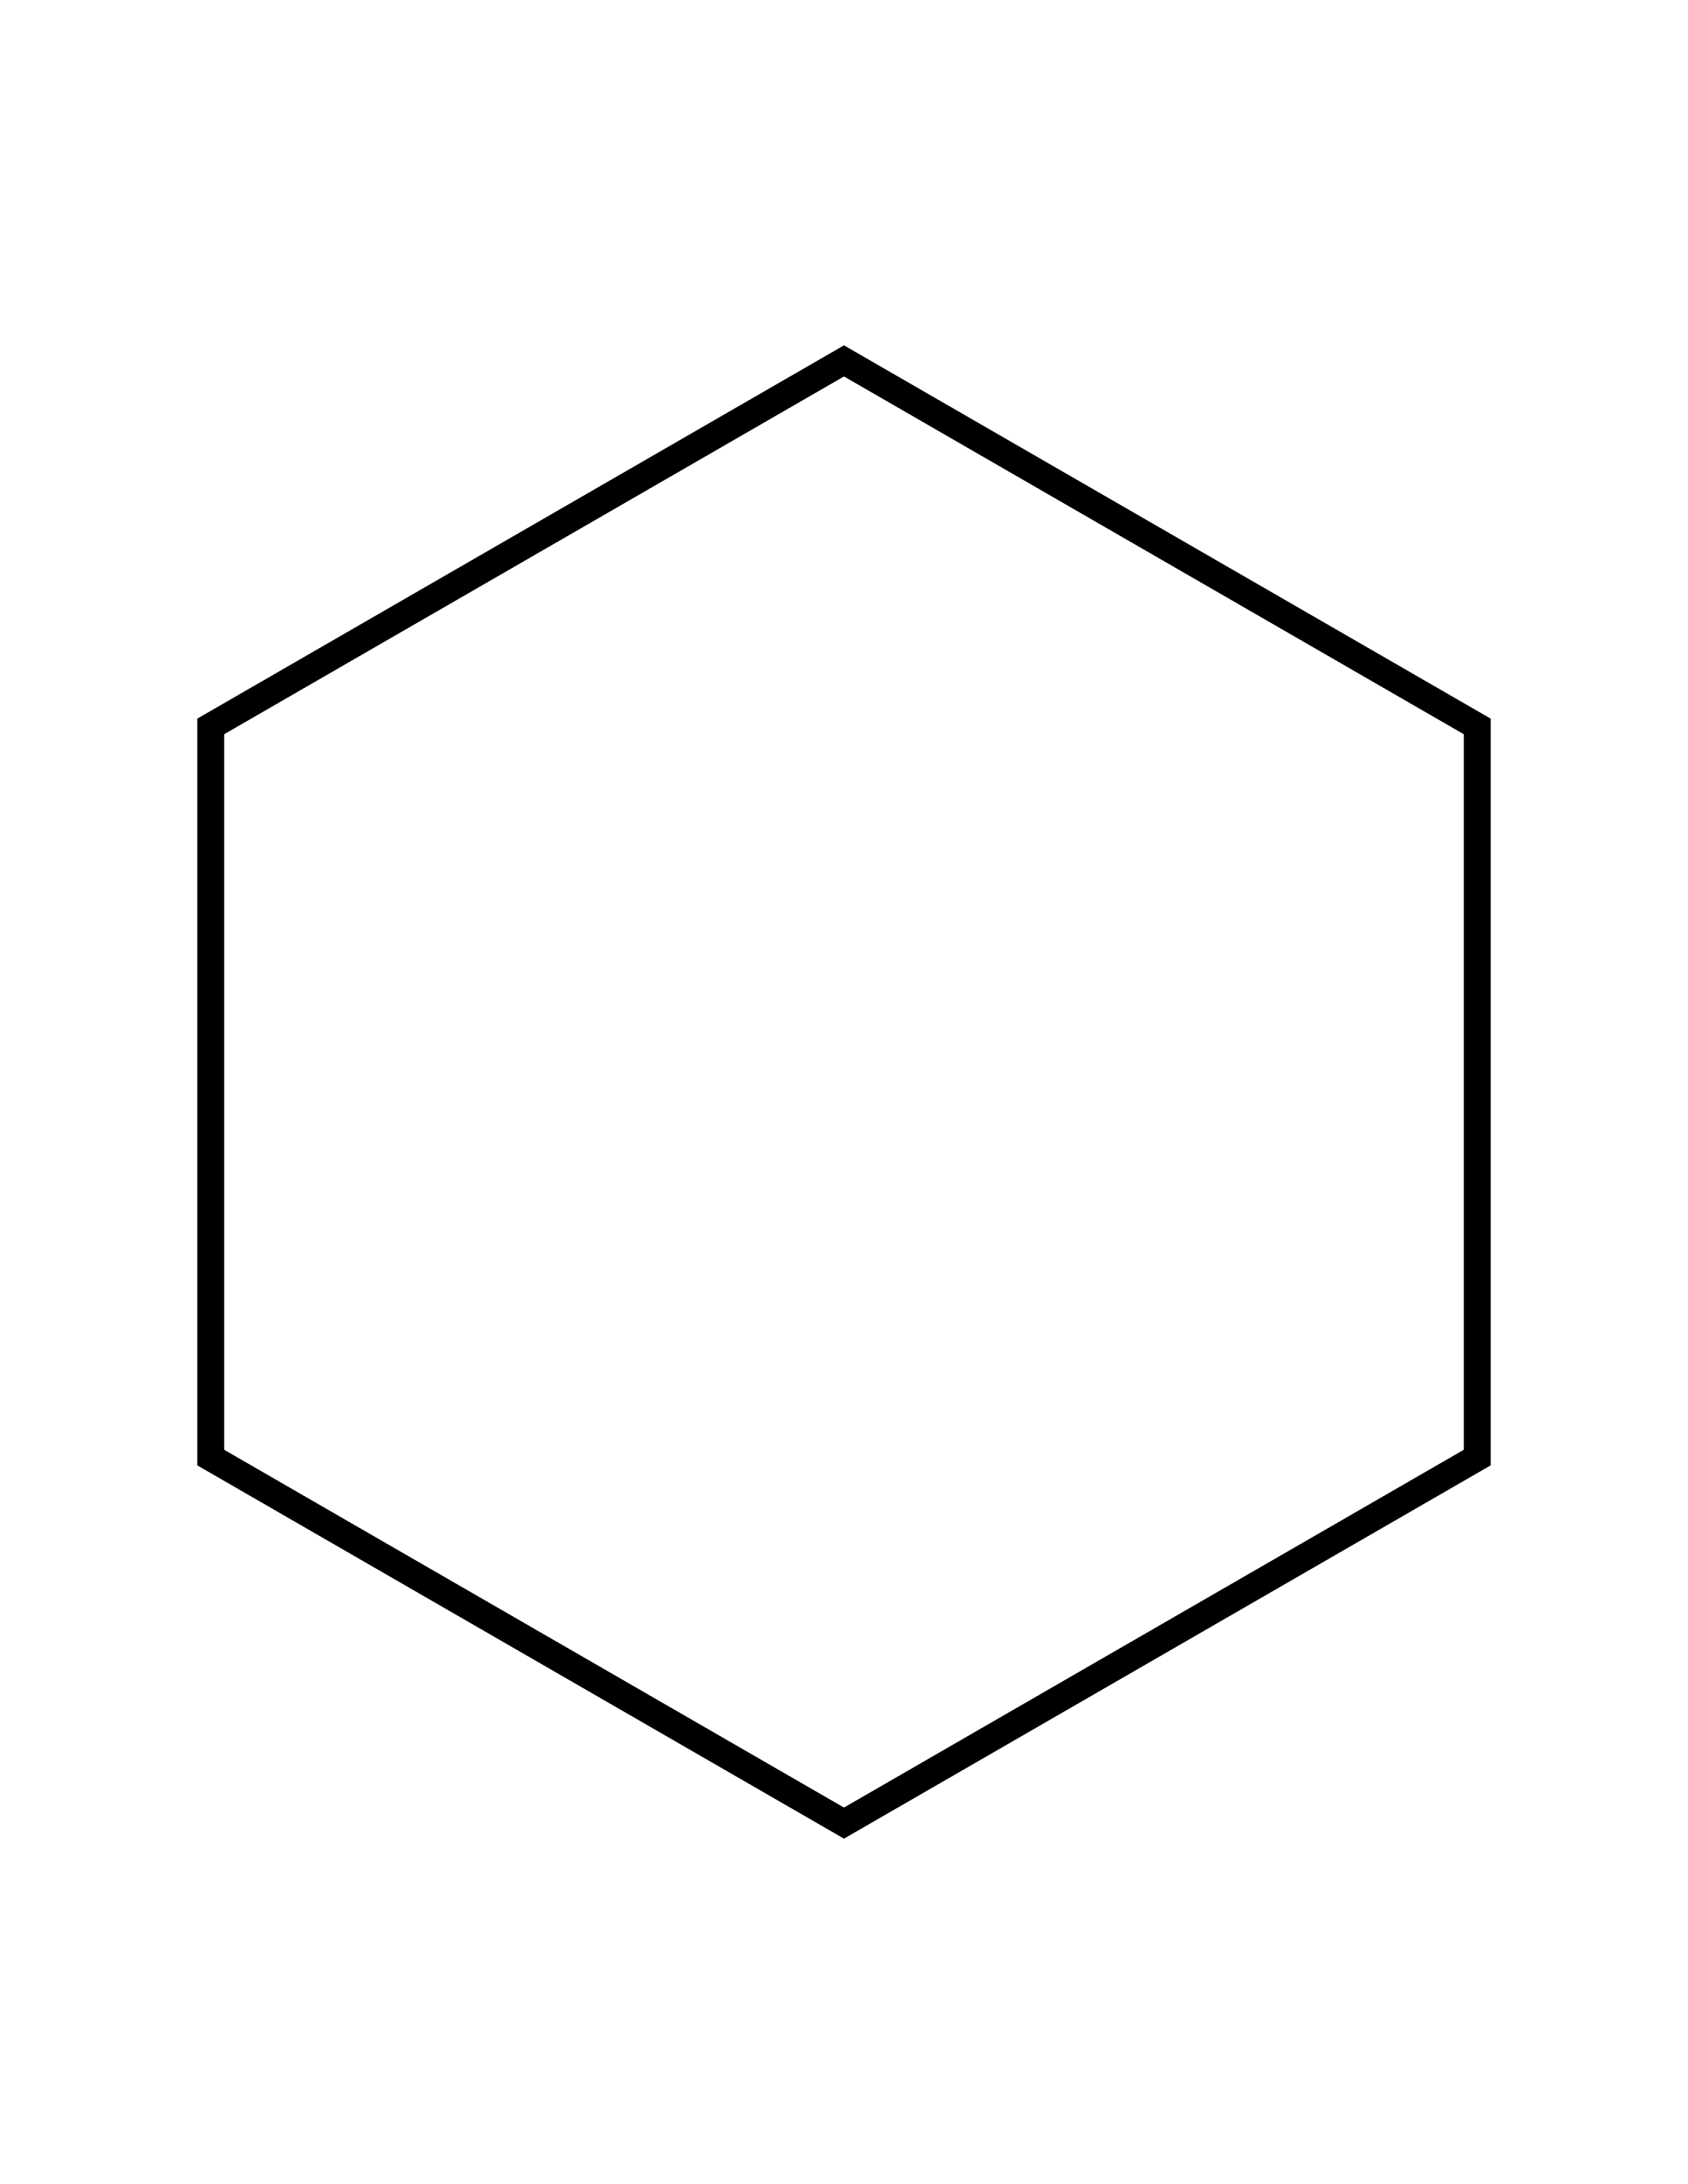 Flashcard of a polygon with six equal sides | ClipArt ETC